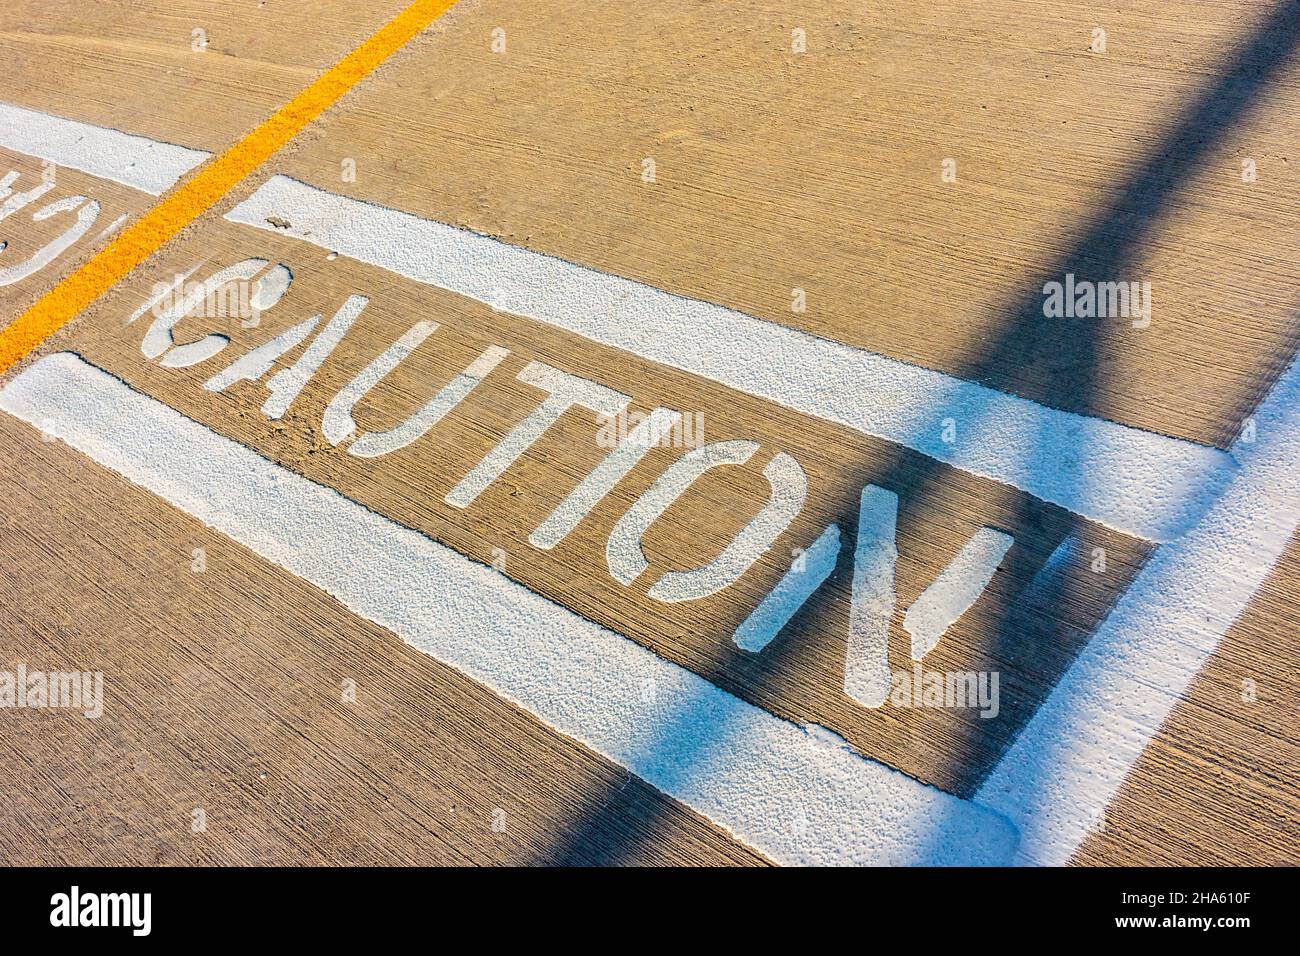 The word caution spelled out in white paint on the sidewalk. Stock Photo